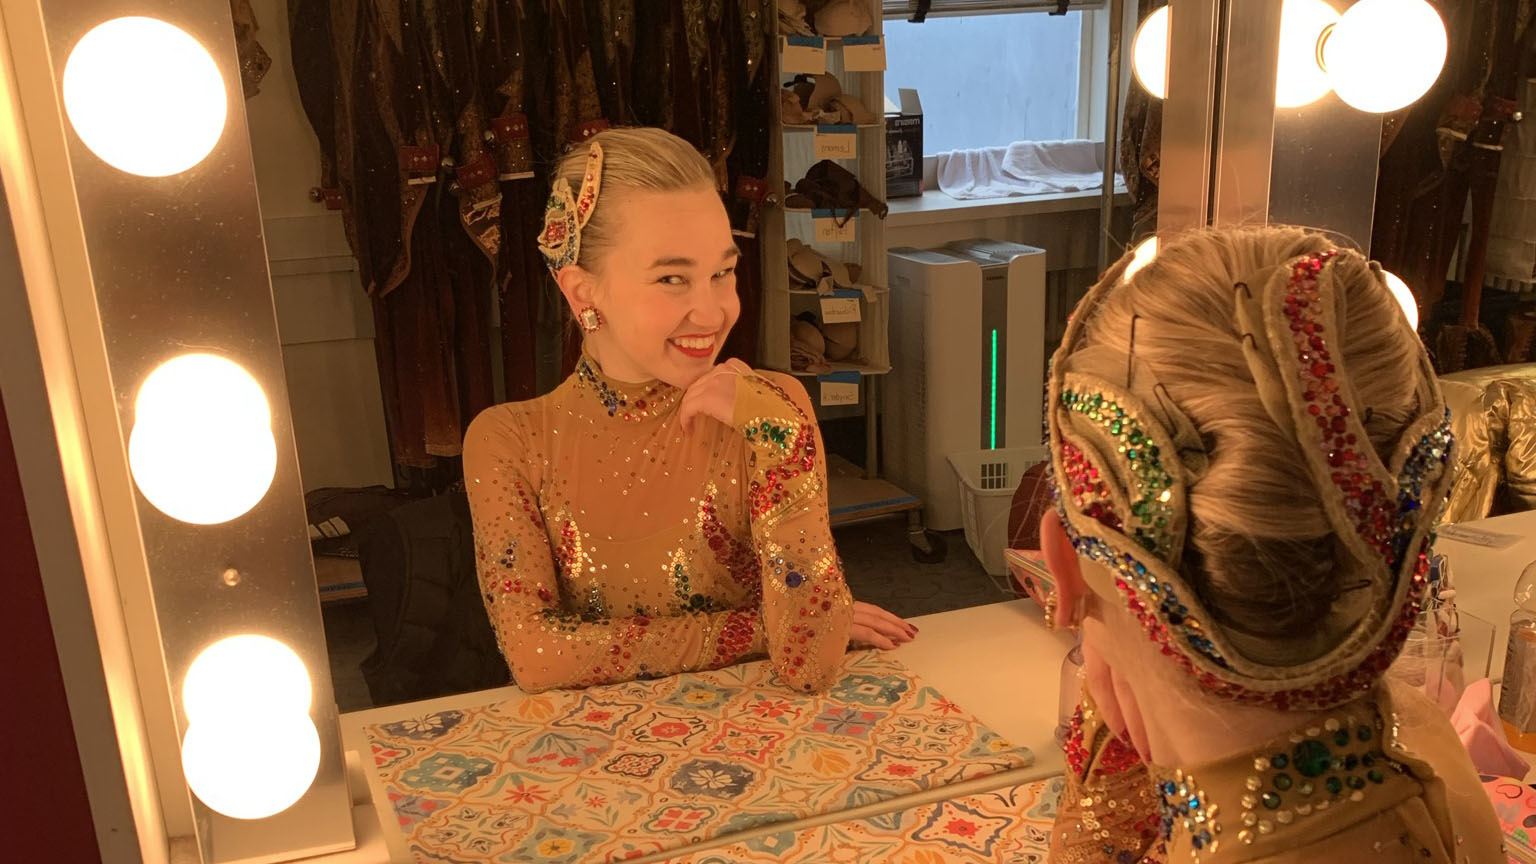 Kathleen Laituri grins at herself in the mirror, resting her chin on her right hand. She's in The Rockettes' dressing room, wearing a sequined holiday costume.